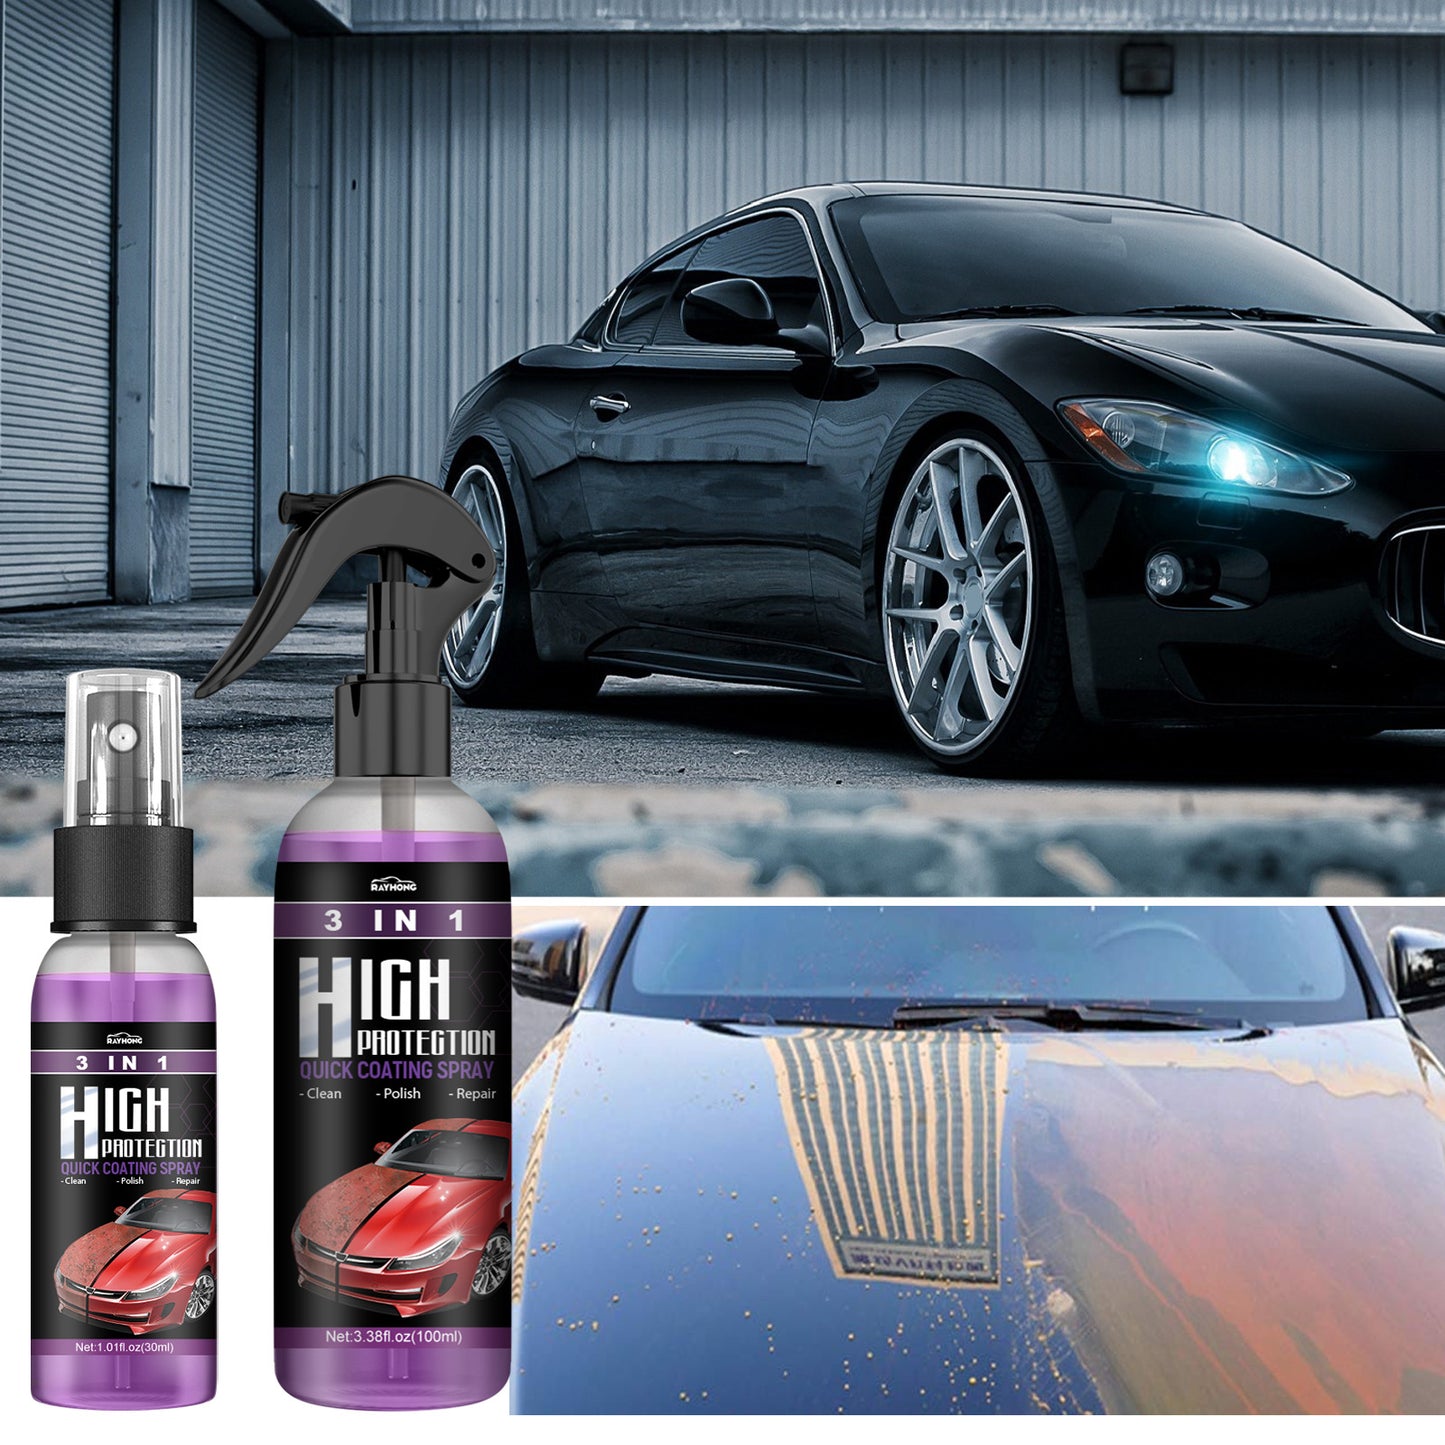 🔥Hot Summer Sale 50% OFF🔥3 IN 1 HIGH PROTECTION CAR SPRAY